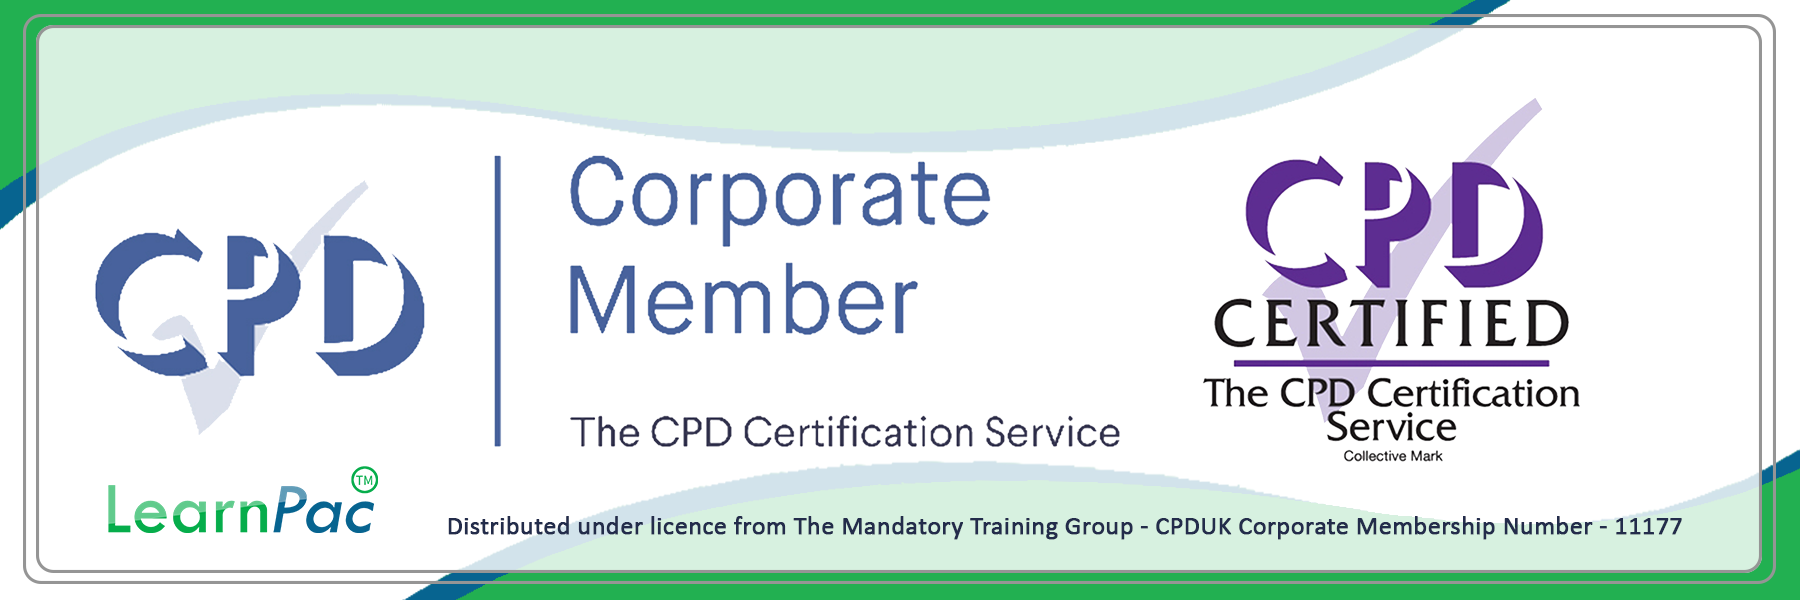 Duty of Care - E-Learning Courses with Certificates - CPD Certified - LearnPac Systems UK -